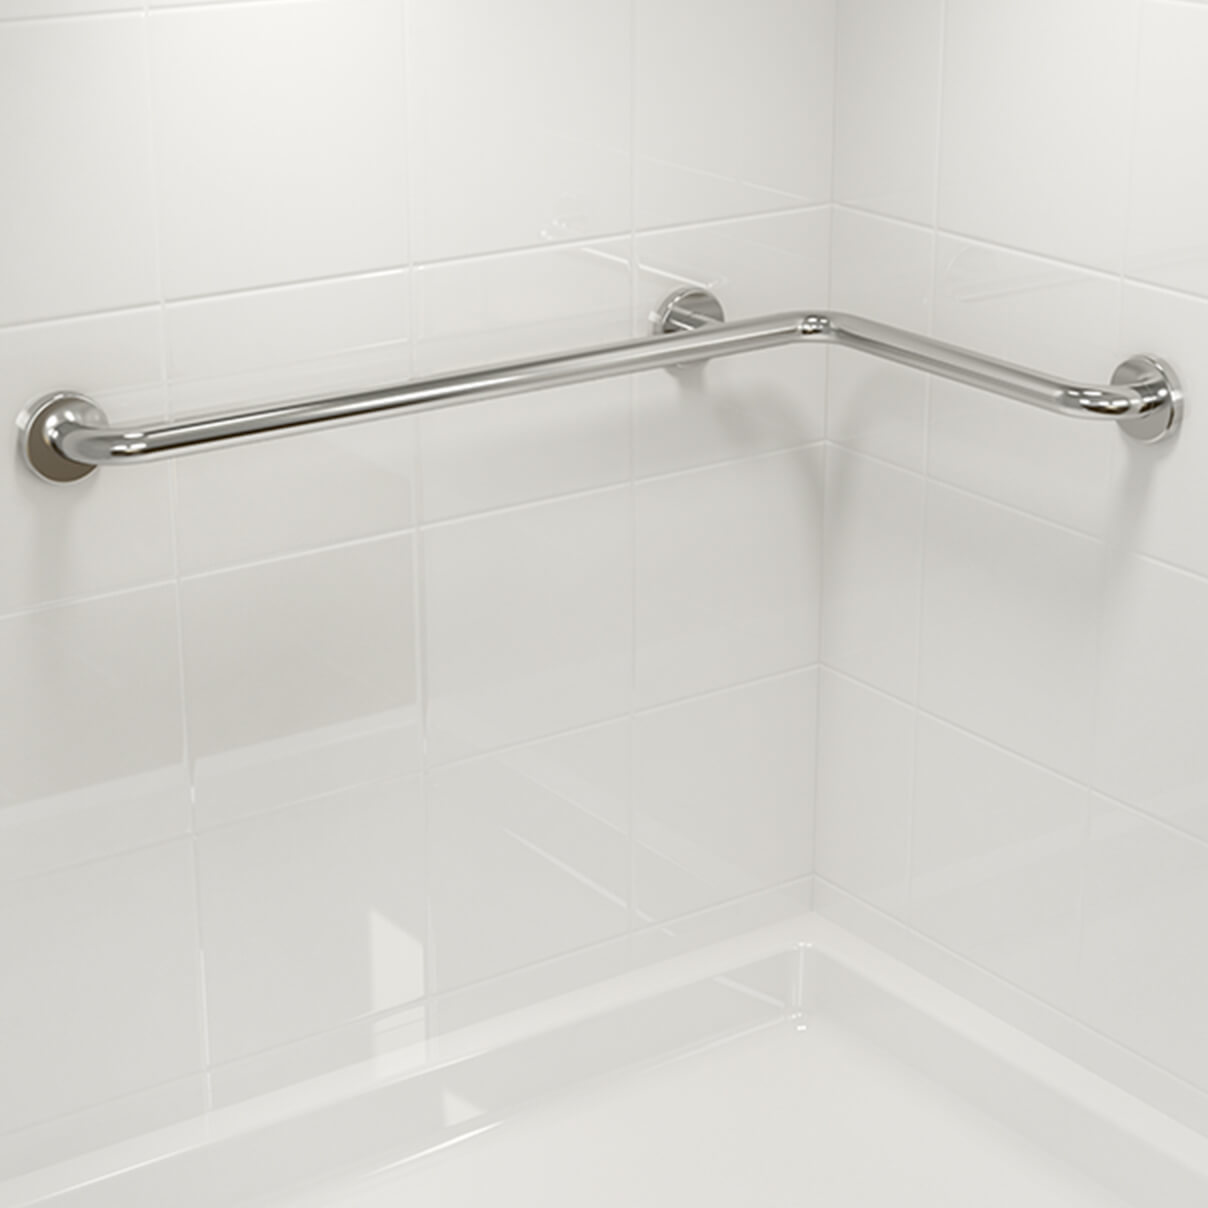 Bathroom Accessories - Shower Seats, Grab Bars, Storage and